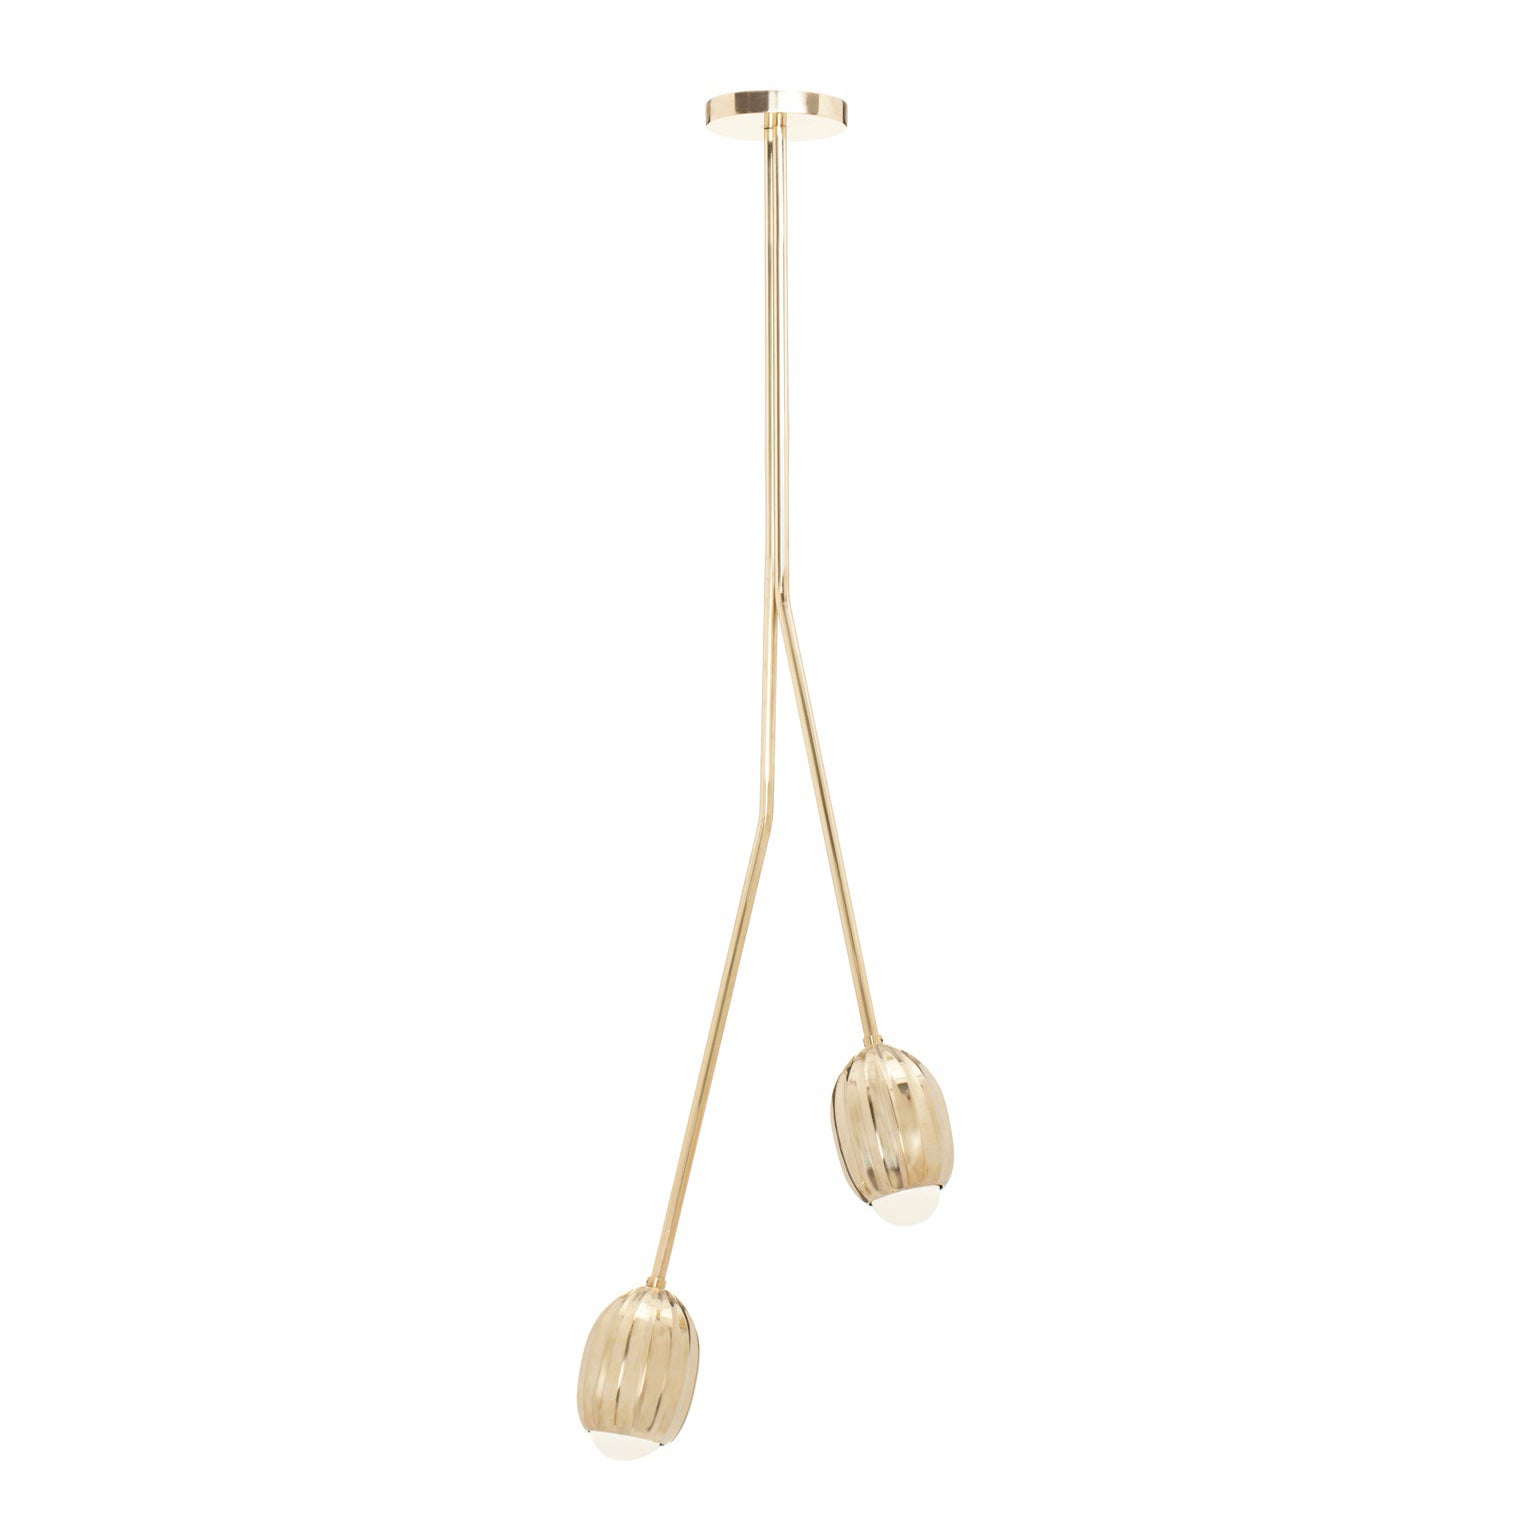 Poppy Polished Brass 2 Stem V Chandelier by Fred and Juul For Sale